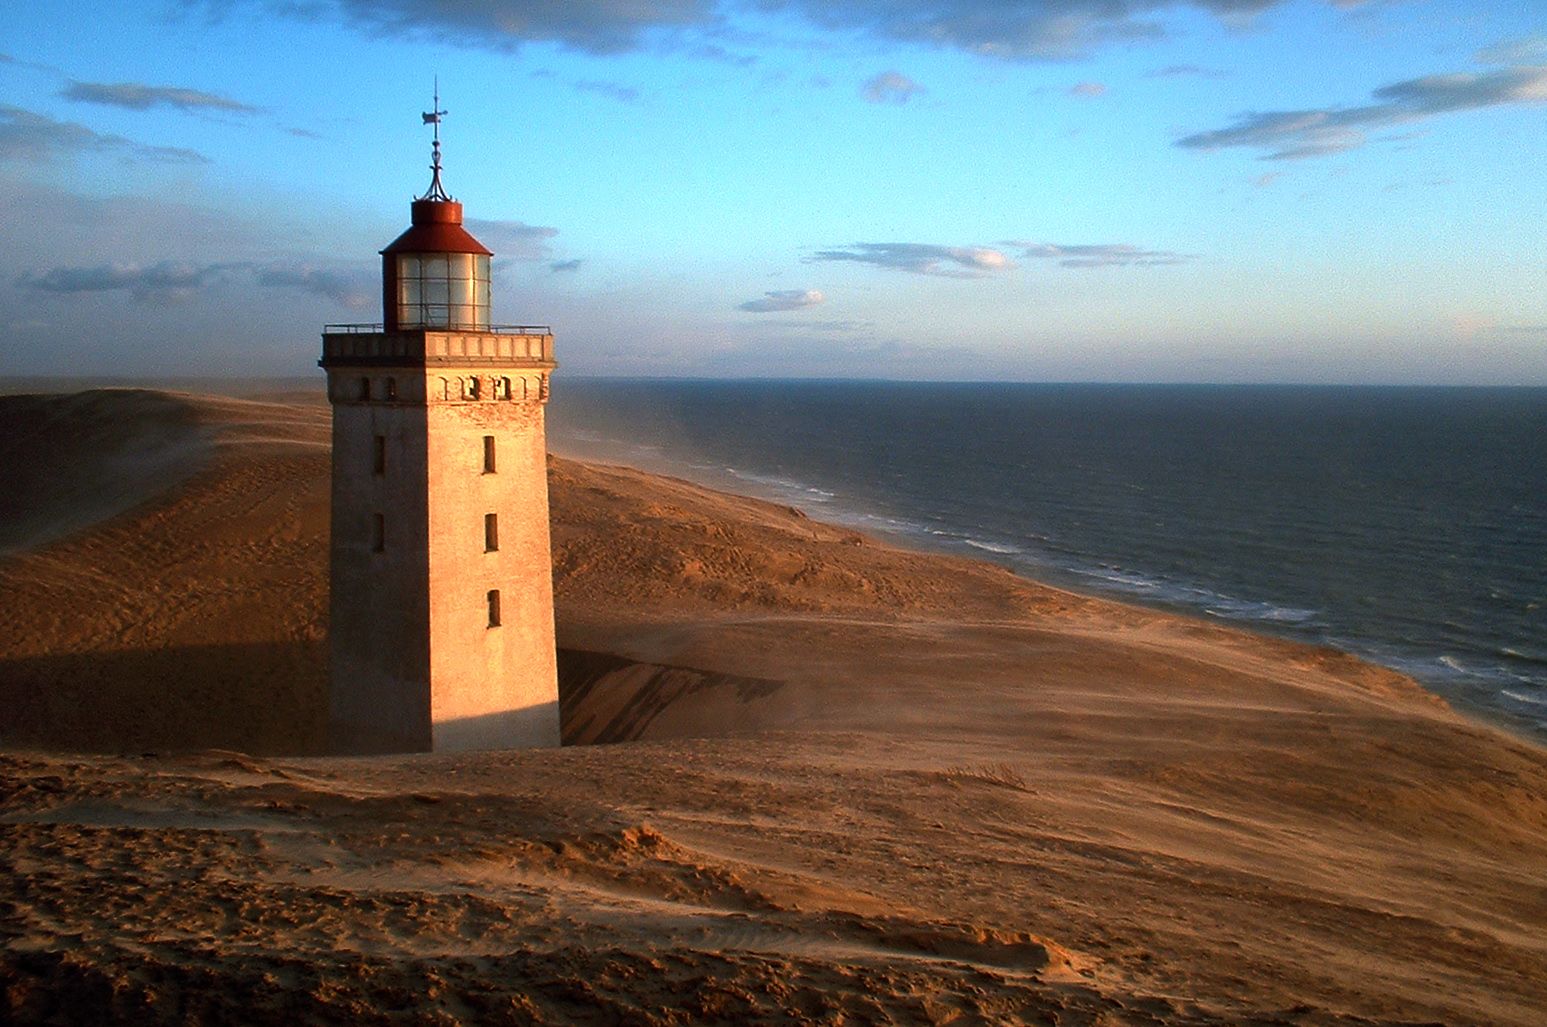 Abandoned Danish lighthouse turned into artsy attraction